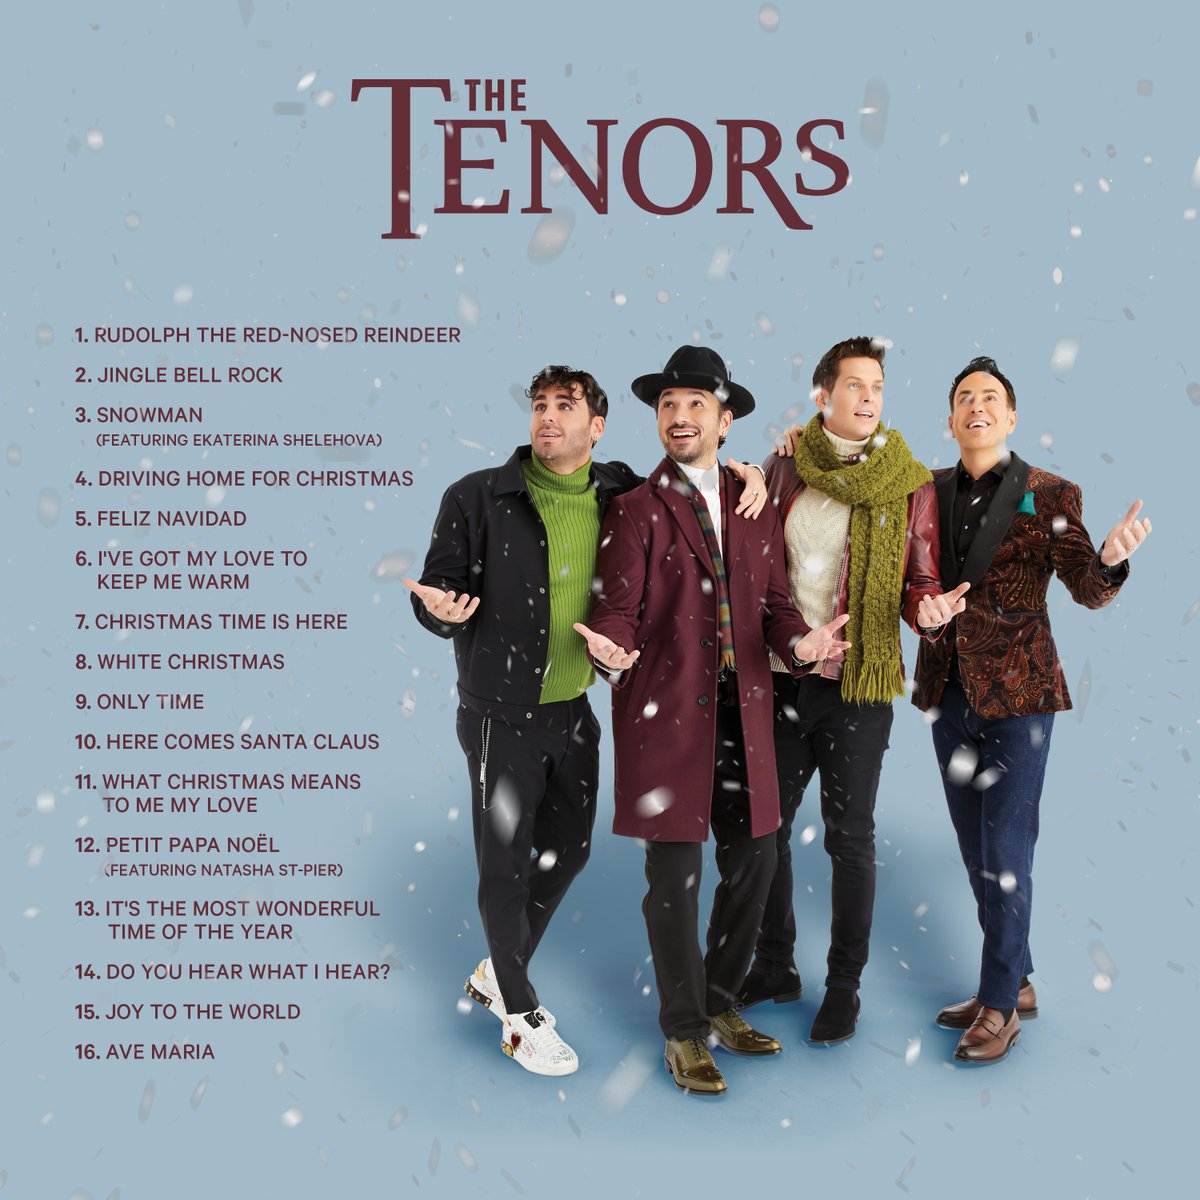 Hints have been dropped… new music is here ❤️❄️!! “I’ve Got My Love To Keep Me Warm” is out now!! This is the first single off of our new album, Christmas with The Tenors which will be available on September 29th. “I’ve Got My Love to Keep Me Warm”: tenorsmusic.com/gotmylove